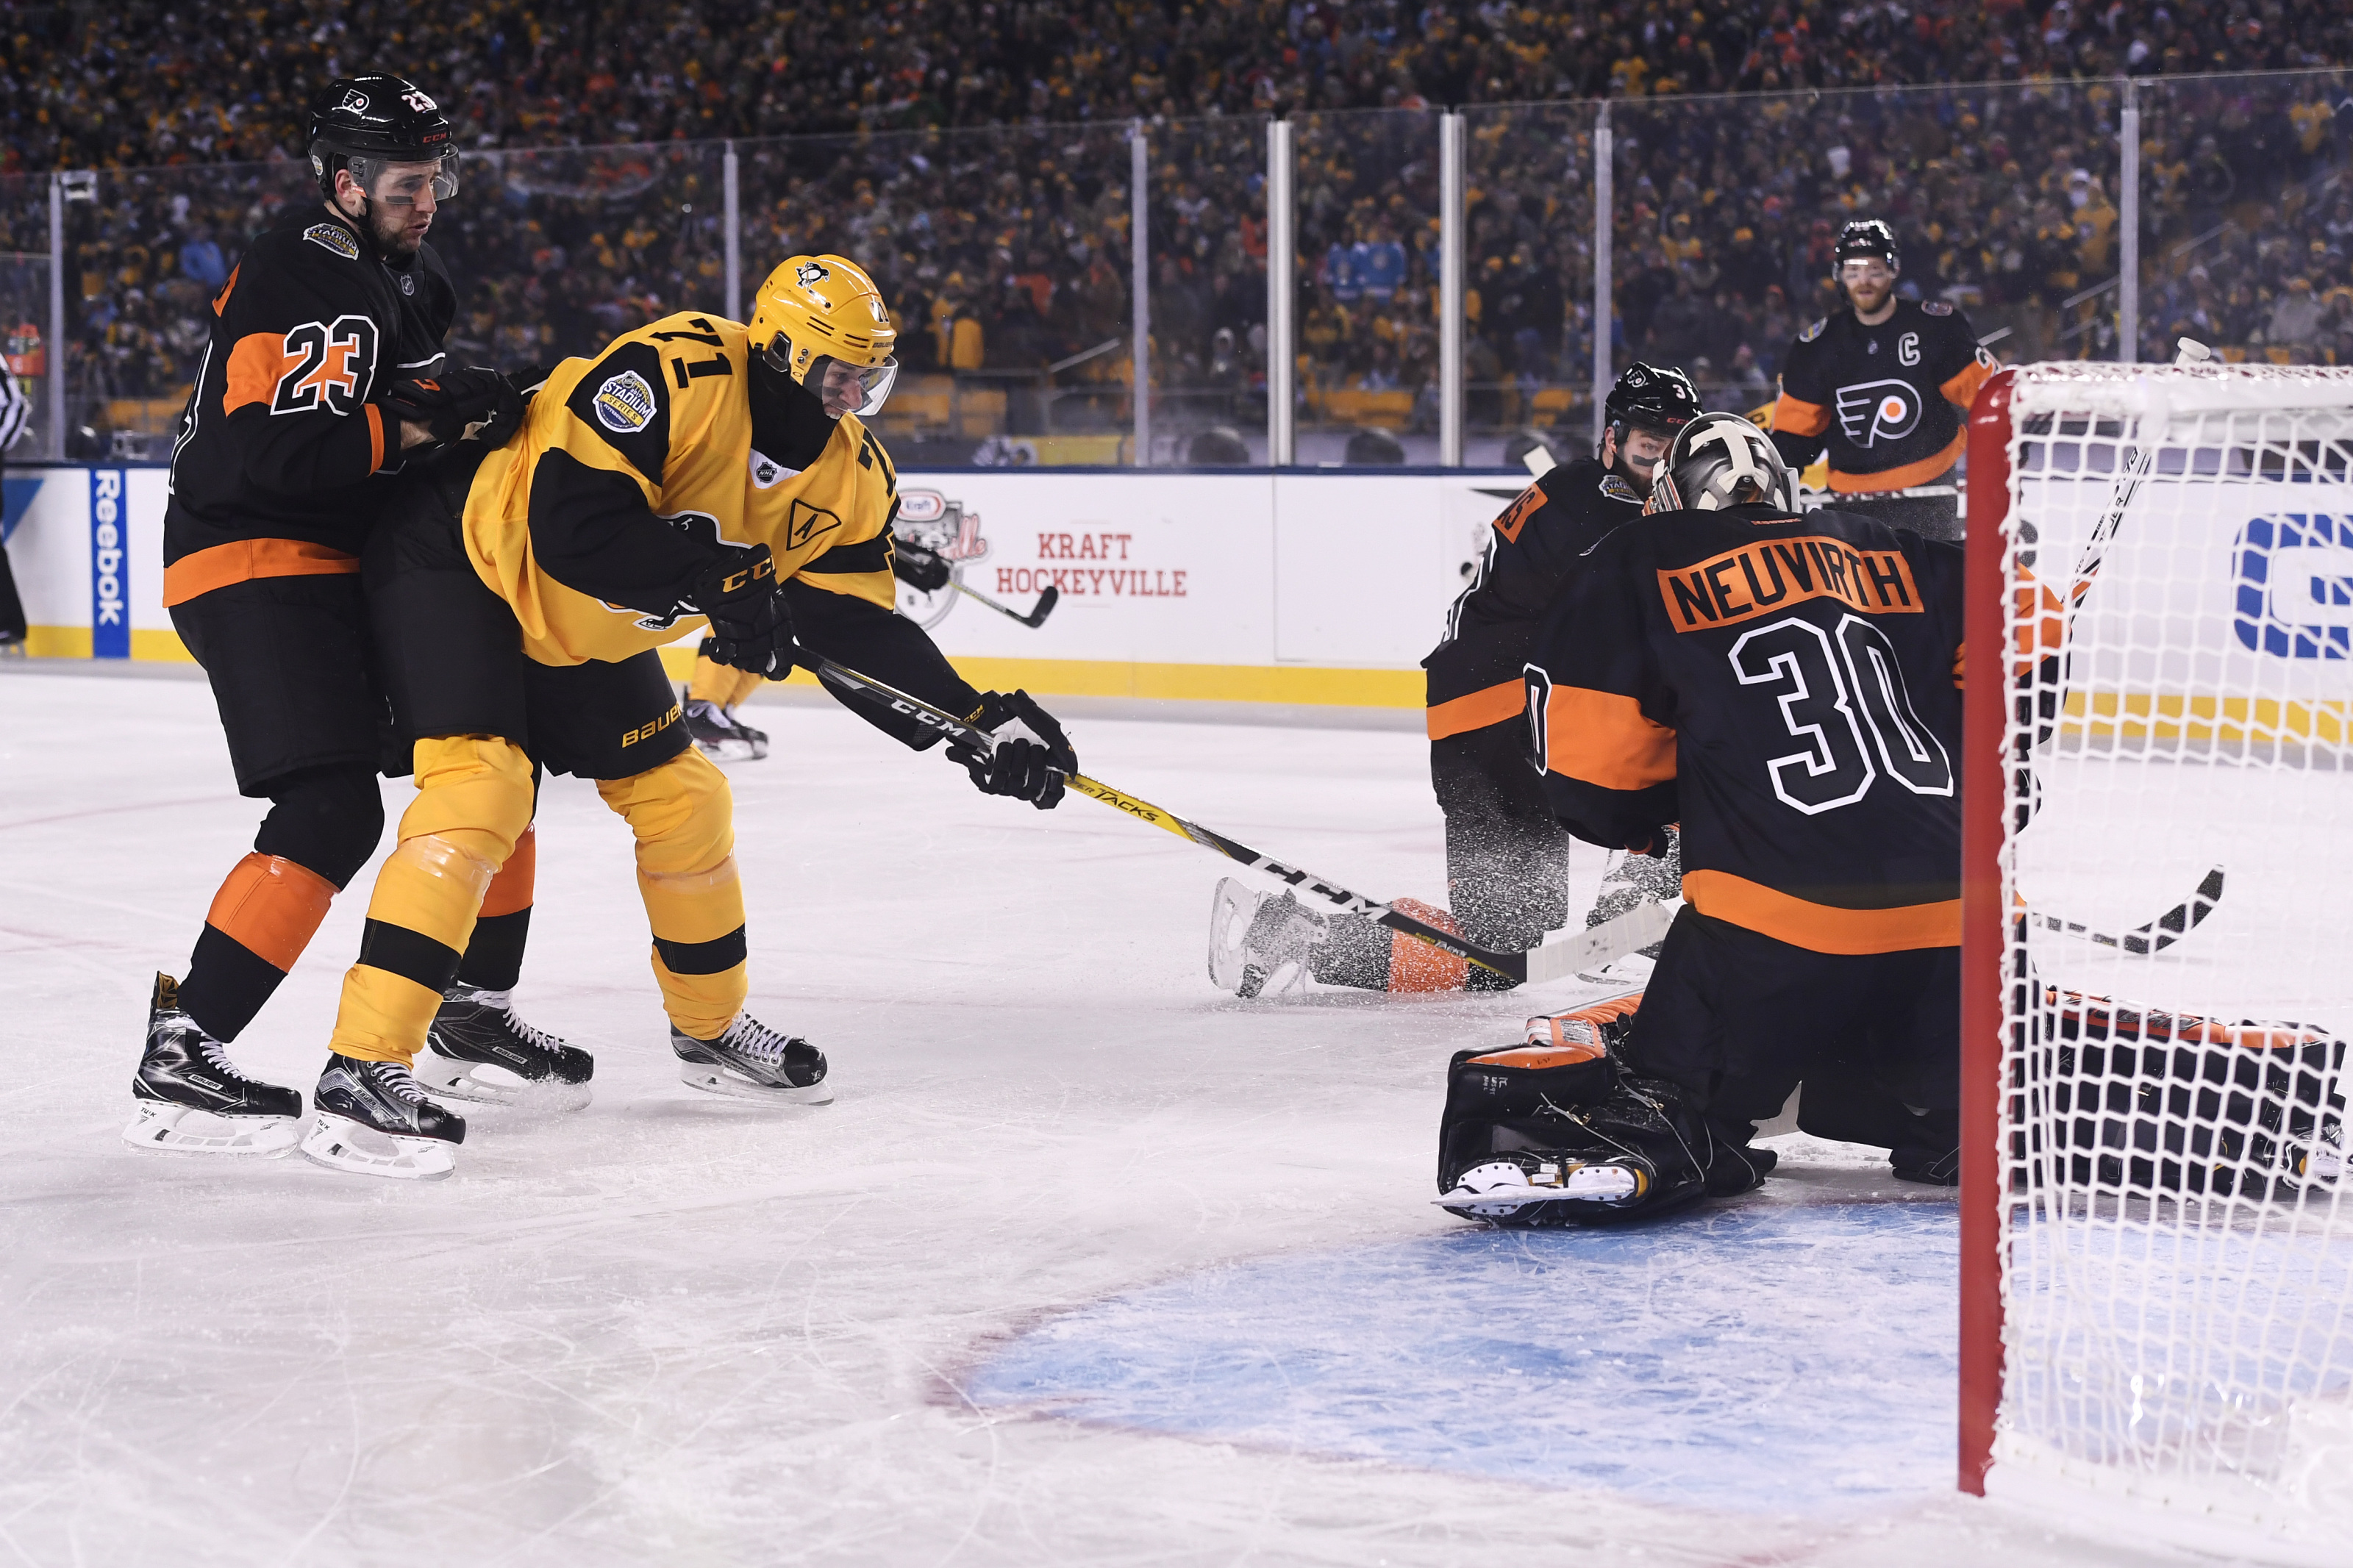 February 23, 2019 Pittsburgh Penguins Stadium Series First Period